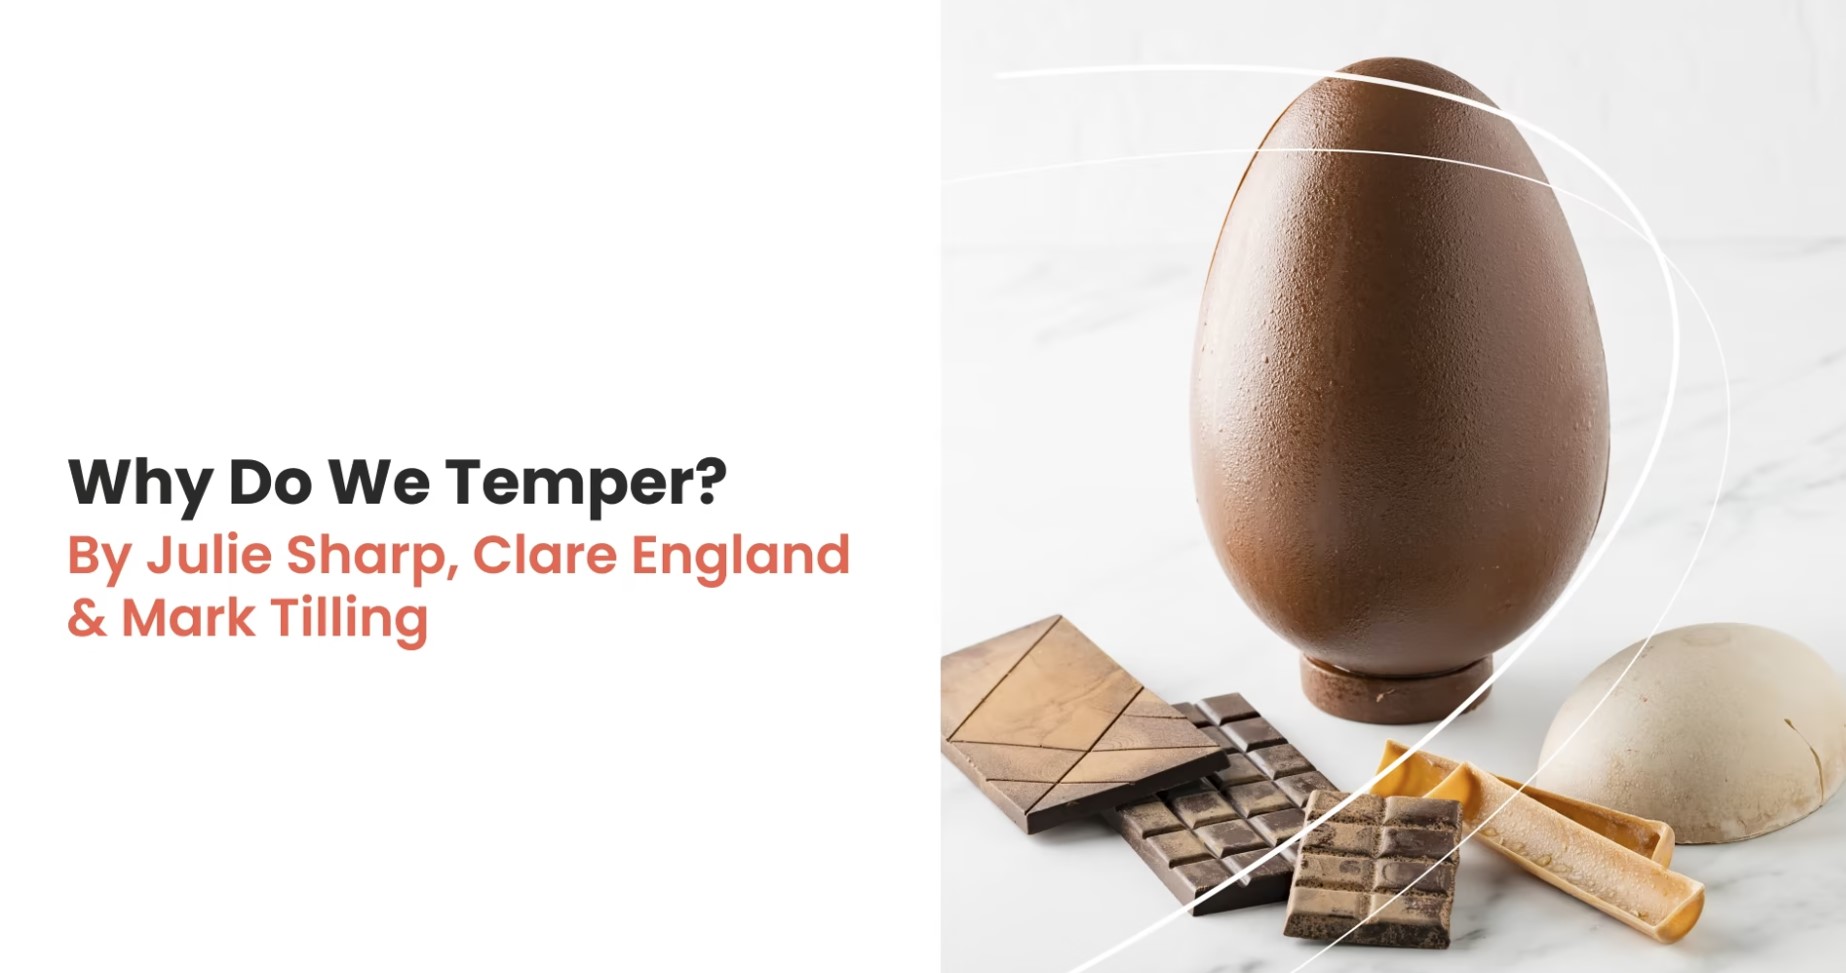 Why Do We Temper?